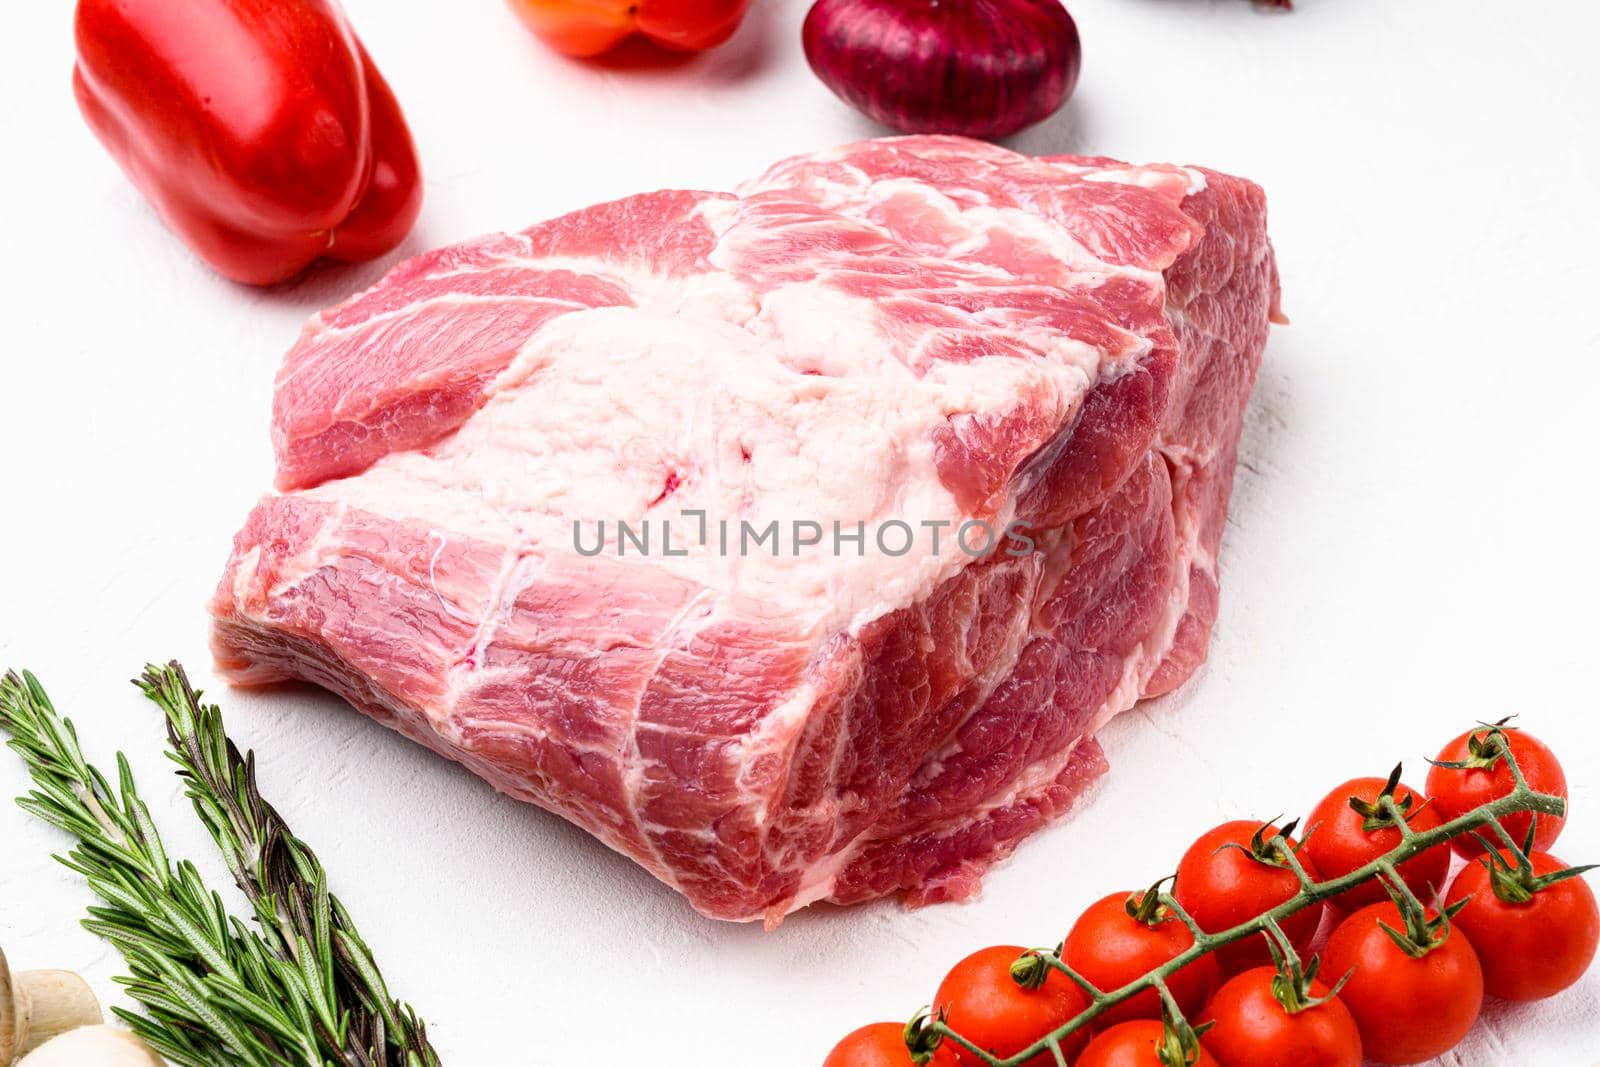 Pork Neck meat steak, with ingredients and herbs, on white stone table background by Ilianesolenyi